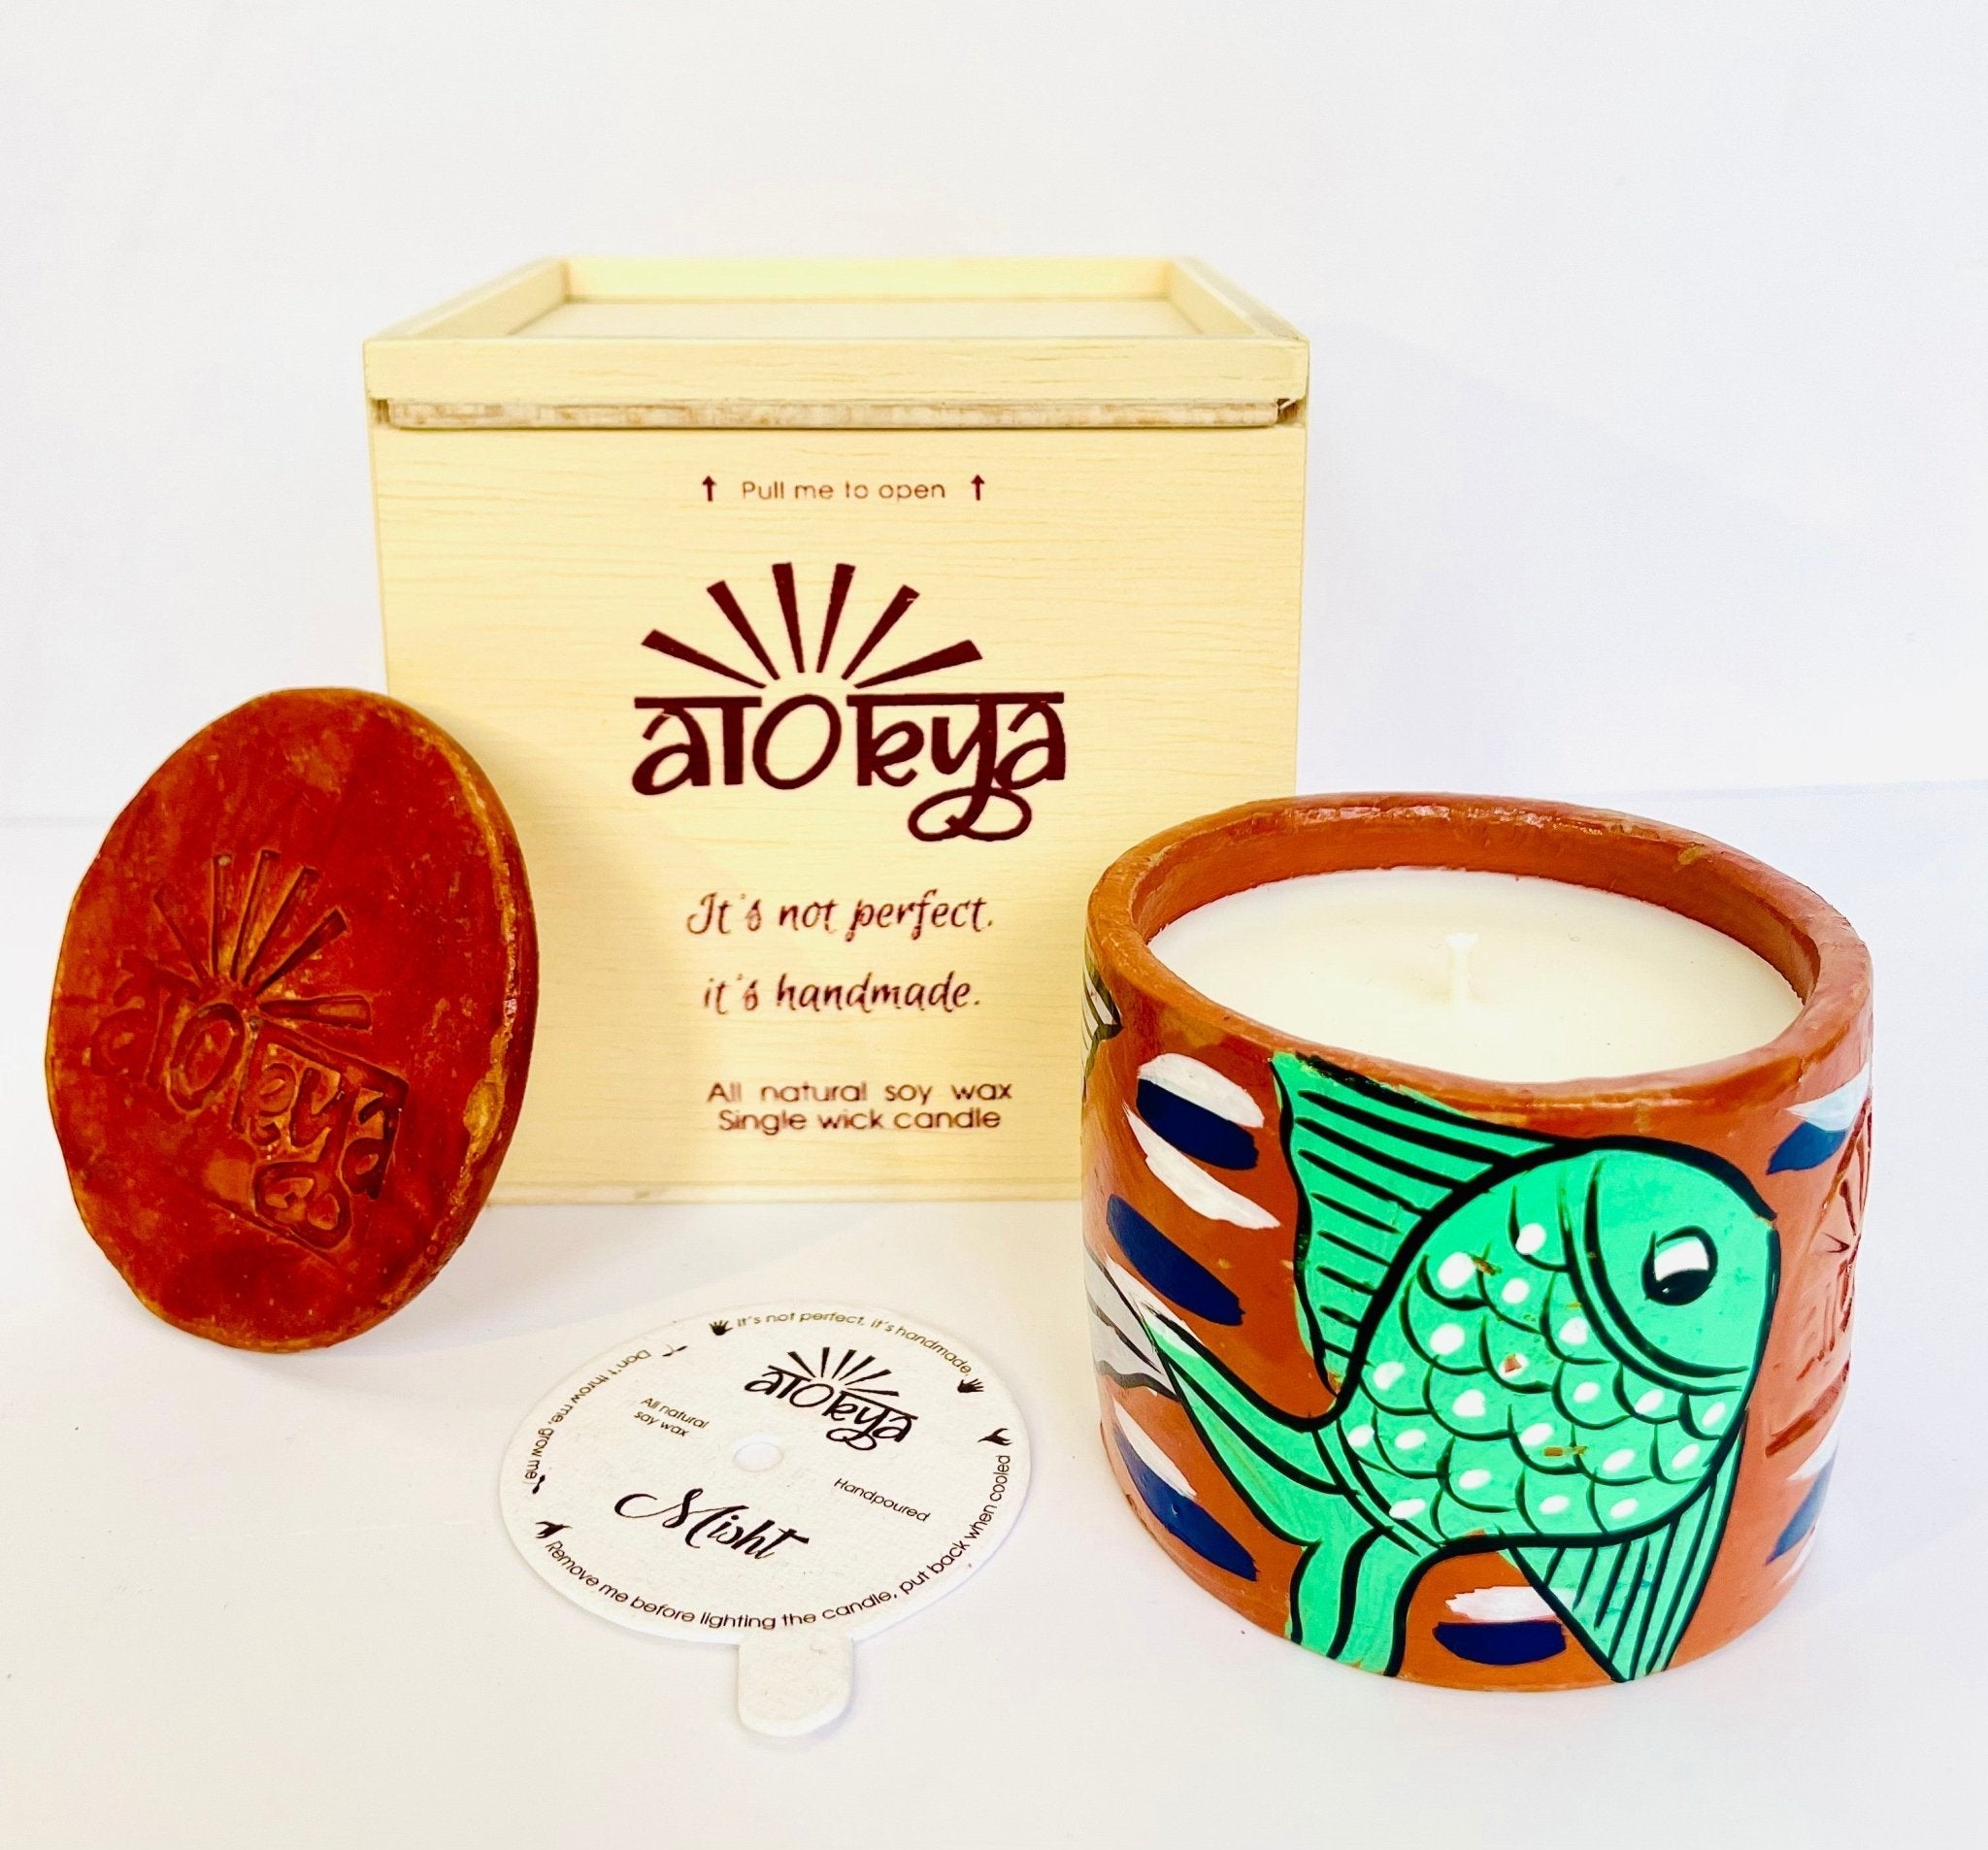 100% natural soy wax scented candle in a terracotta jar that is hand-painted with a green fish motif. A seed paper candle dust cover is placed near the scented candle and has a wooden candle box and candle snuffer in the background. 